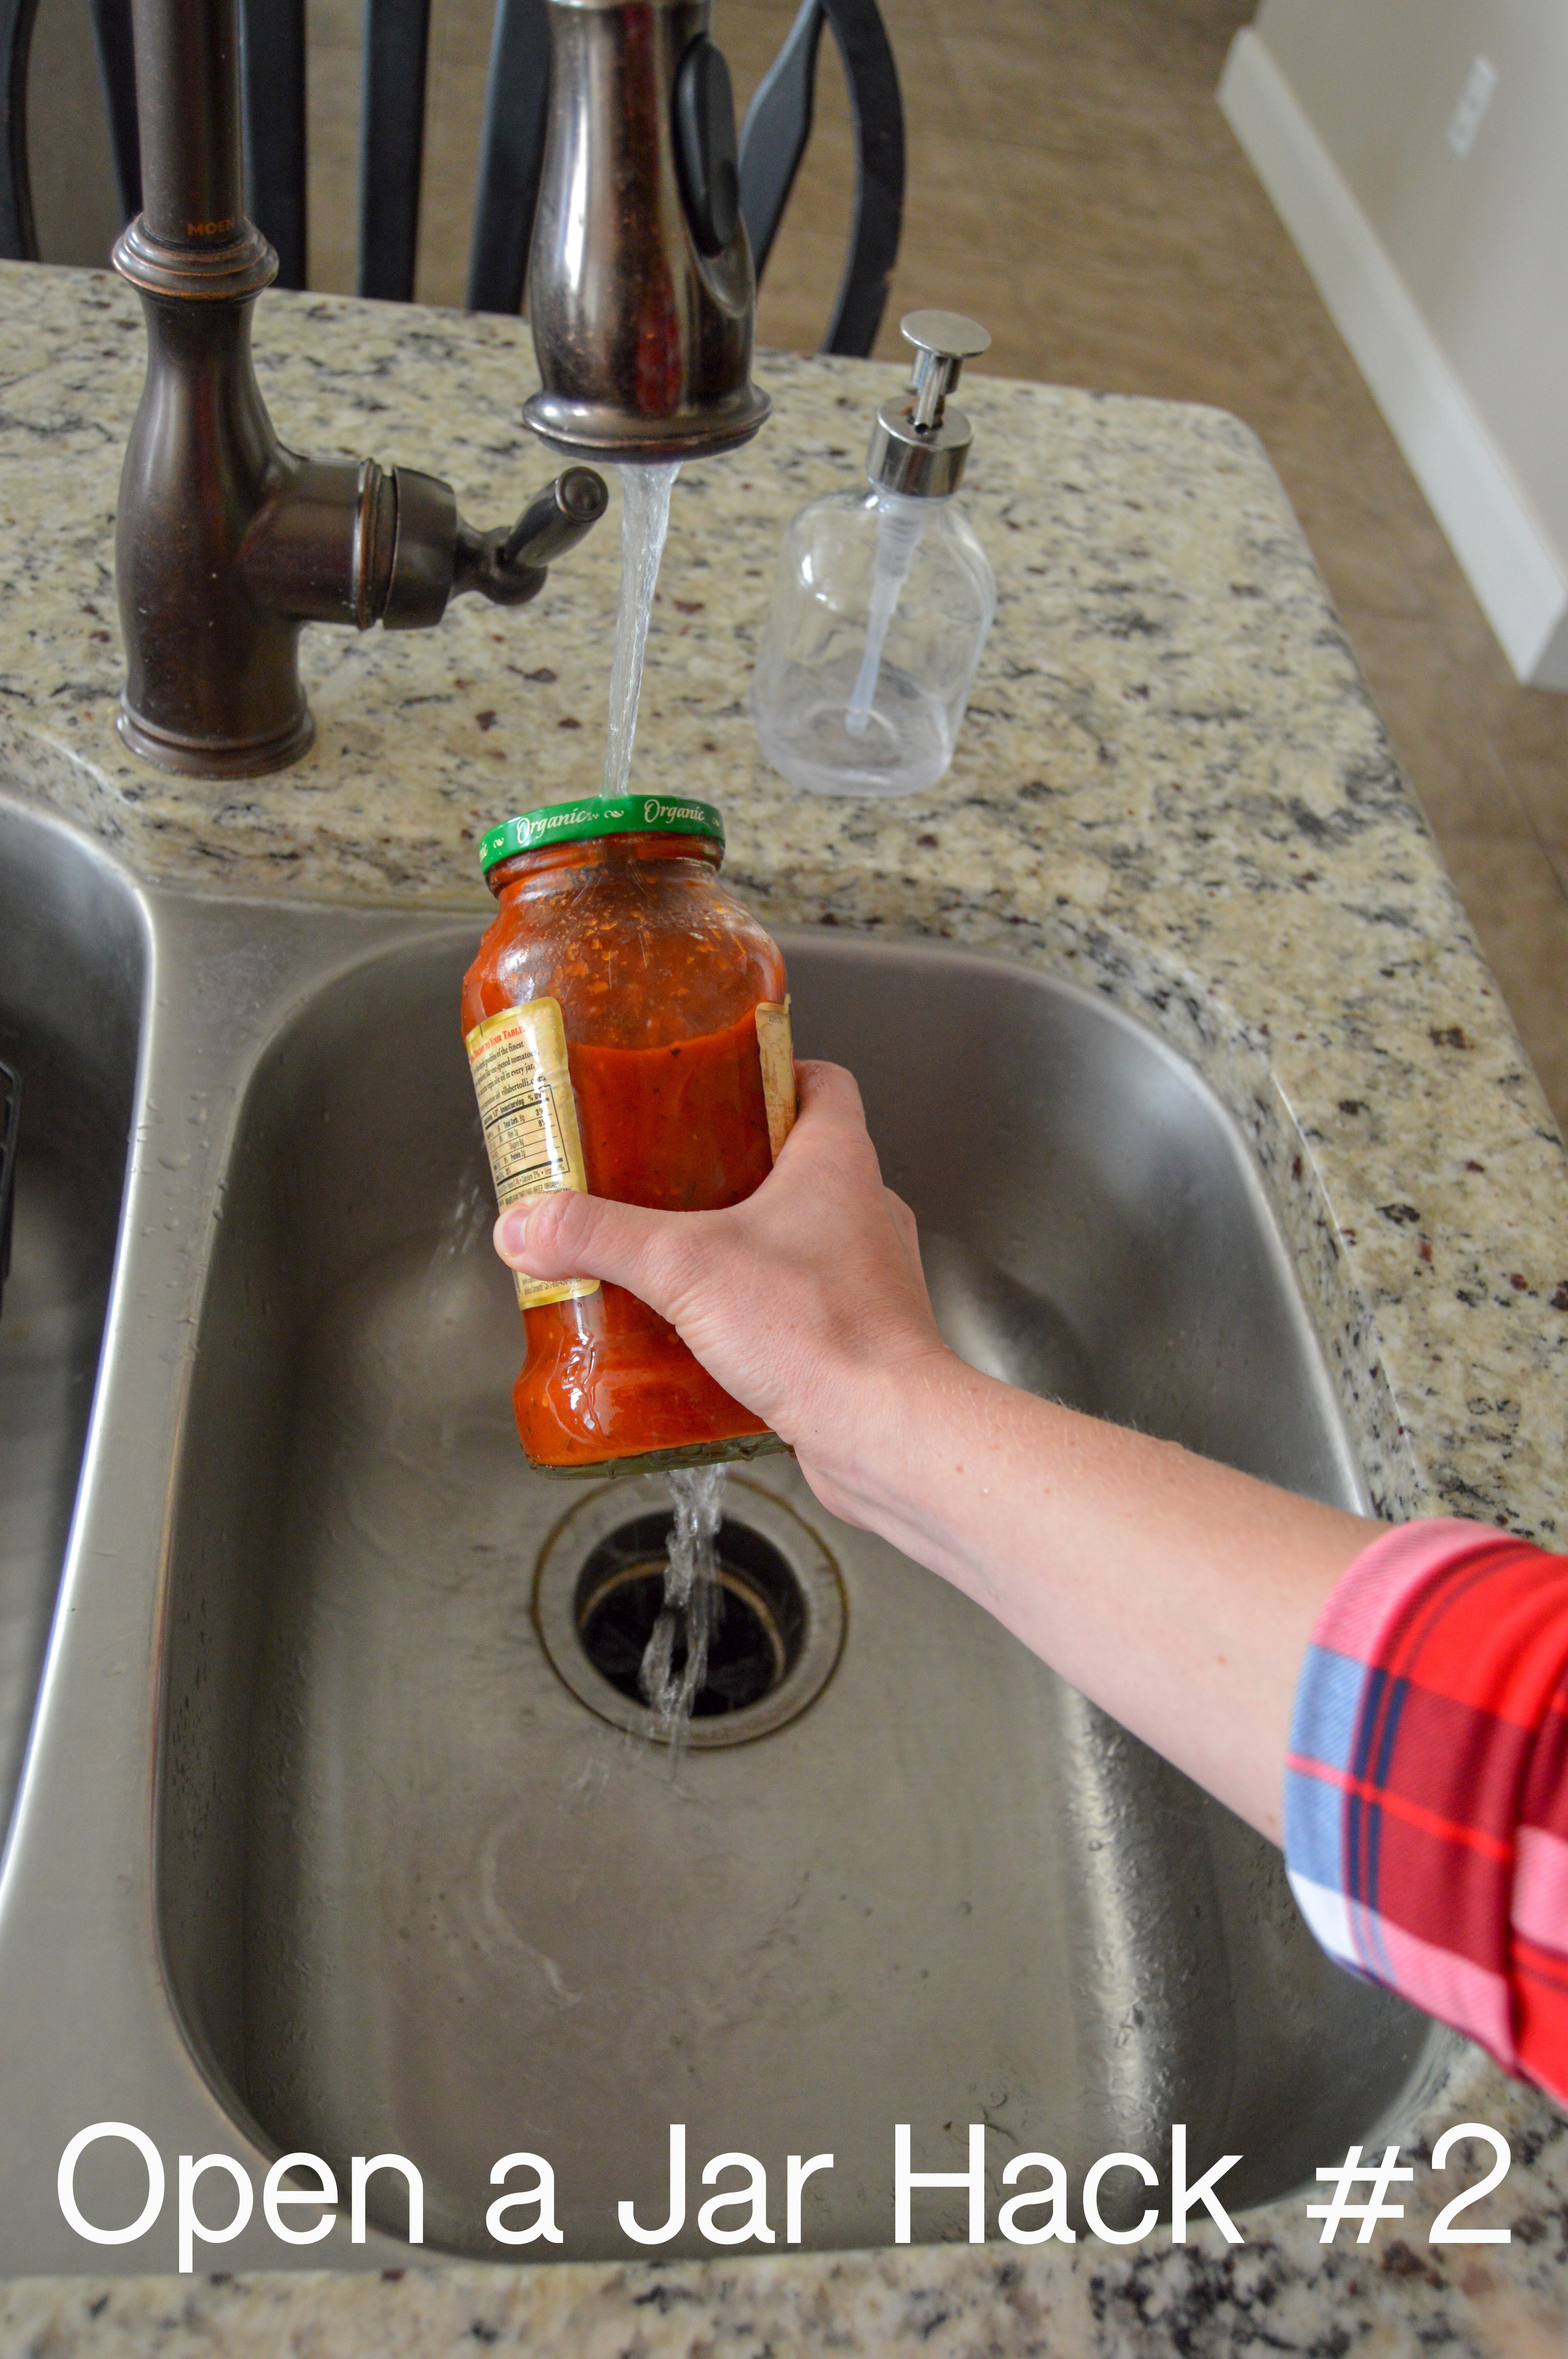 Why does tapping the lid of a hard-to-open jar make it easier to